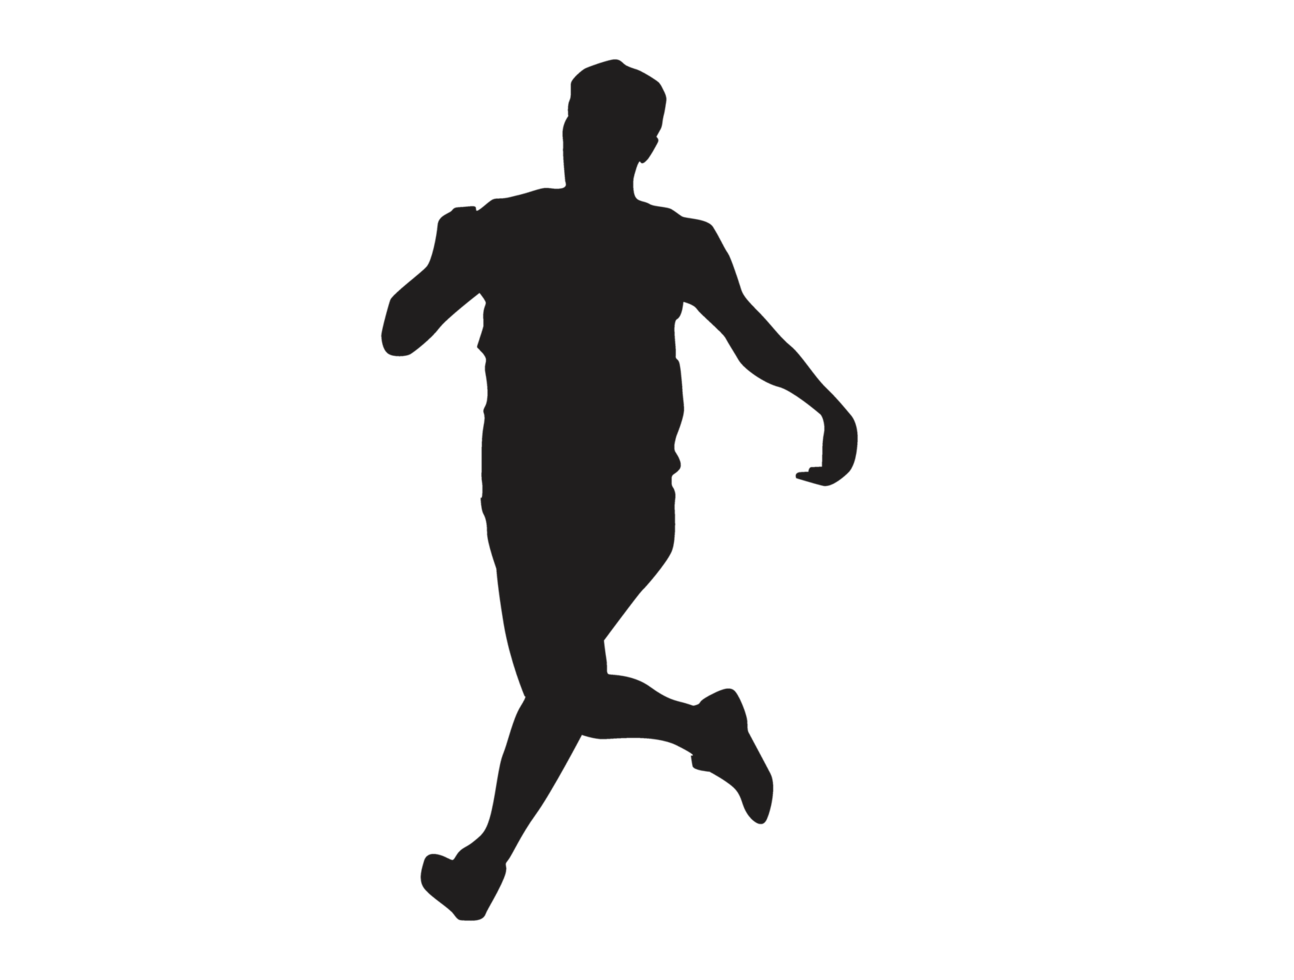 Silhouette of a Runner png